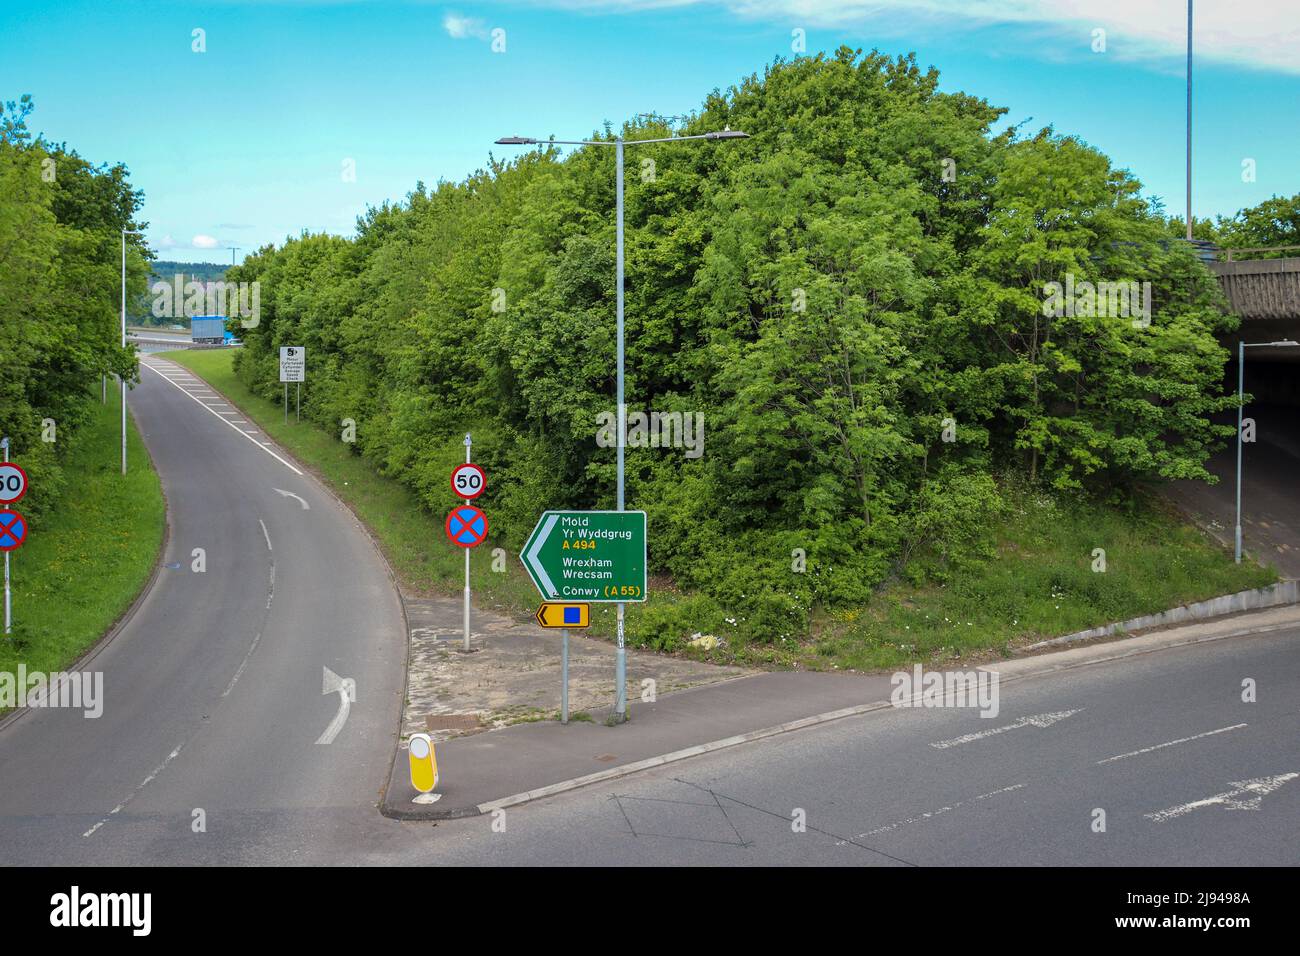 A494, Queensferry Bypass - Welcome to Wales Stock Photo